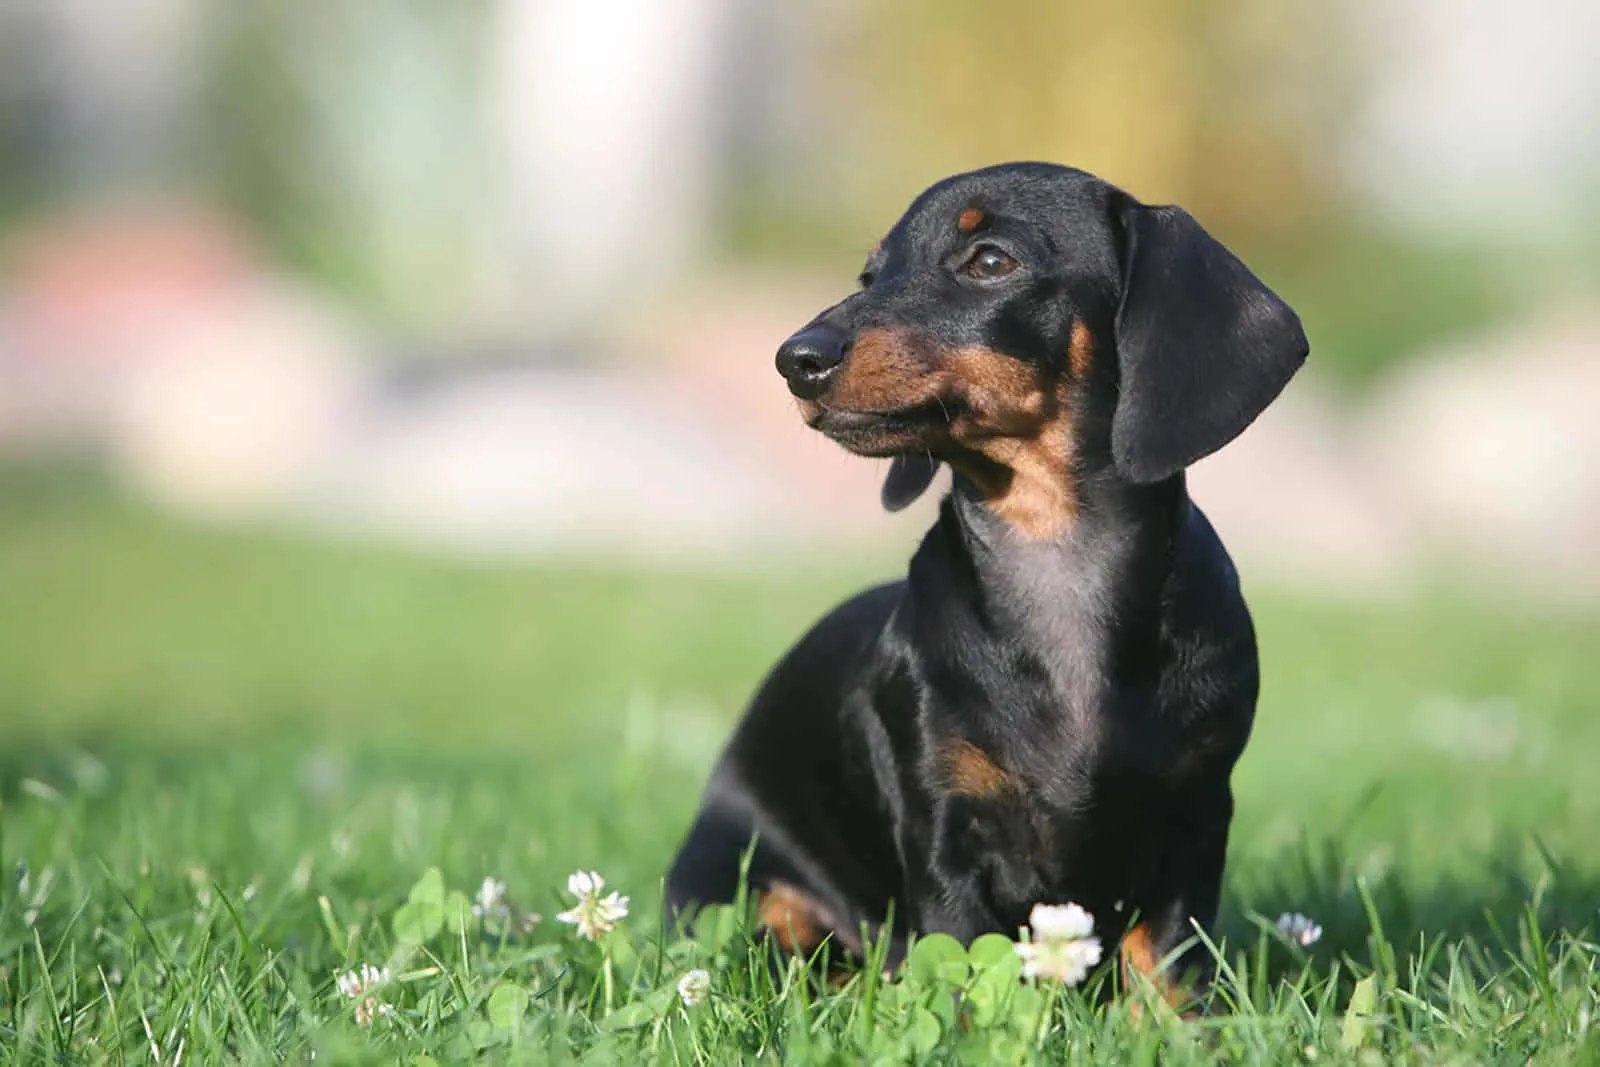 dachshund puppy sitting in the grass in the park